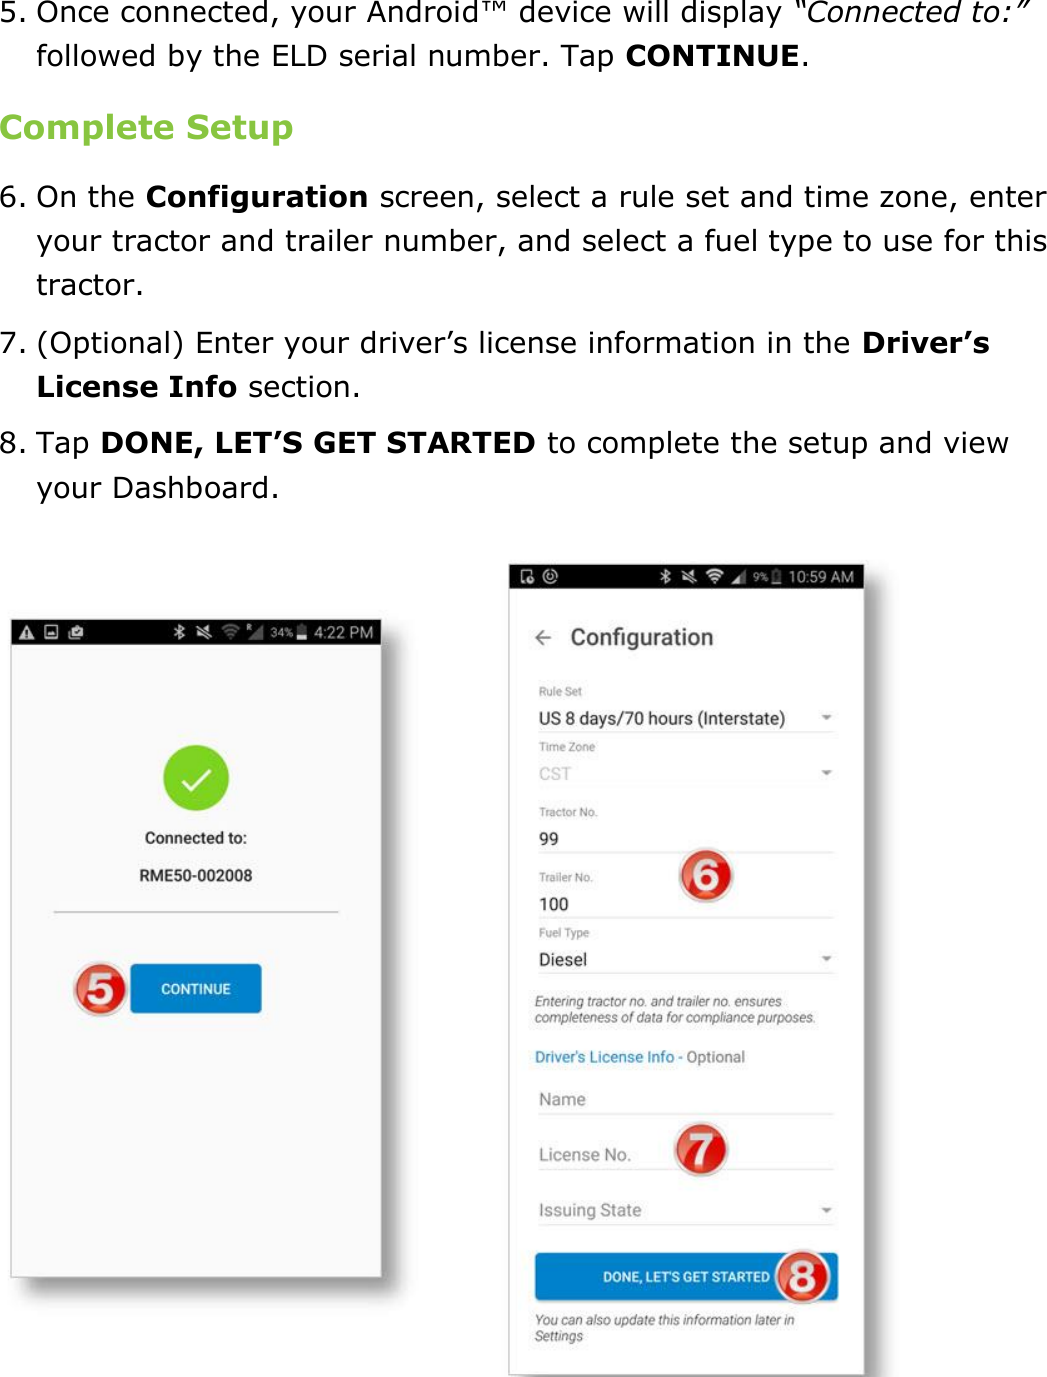 Set My Duty Status DriverConnect User Guide  16 © 2016-2017, Rand McNally, Inc. 5. Once connected, your Android™ device will display “Connected to:” followed by the ELD serial number. Tap CONTINUE. Complete Setup 6. On the Configuration screen, select a rule set and time zone, enter your tractor and trailer number, and select a fuel type to use for this tractor. 7. (Optional) Enter your driver’s license information in the Driver’s License Info section. 8. Tap DONE, LET’S GET STARTED to complete the setup and view your Dashboard.    